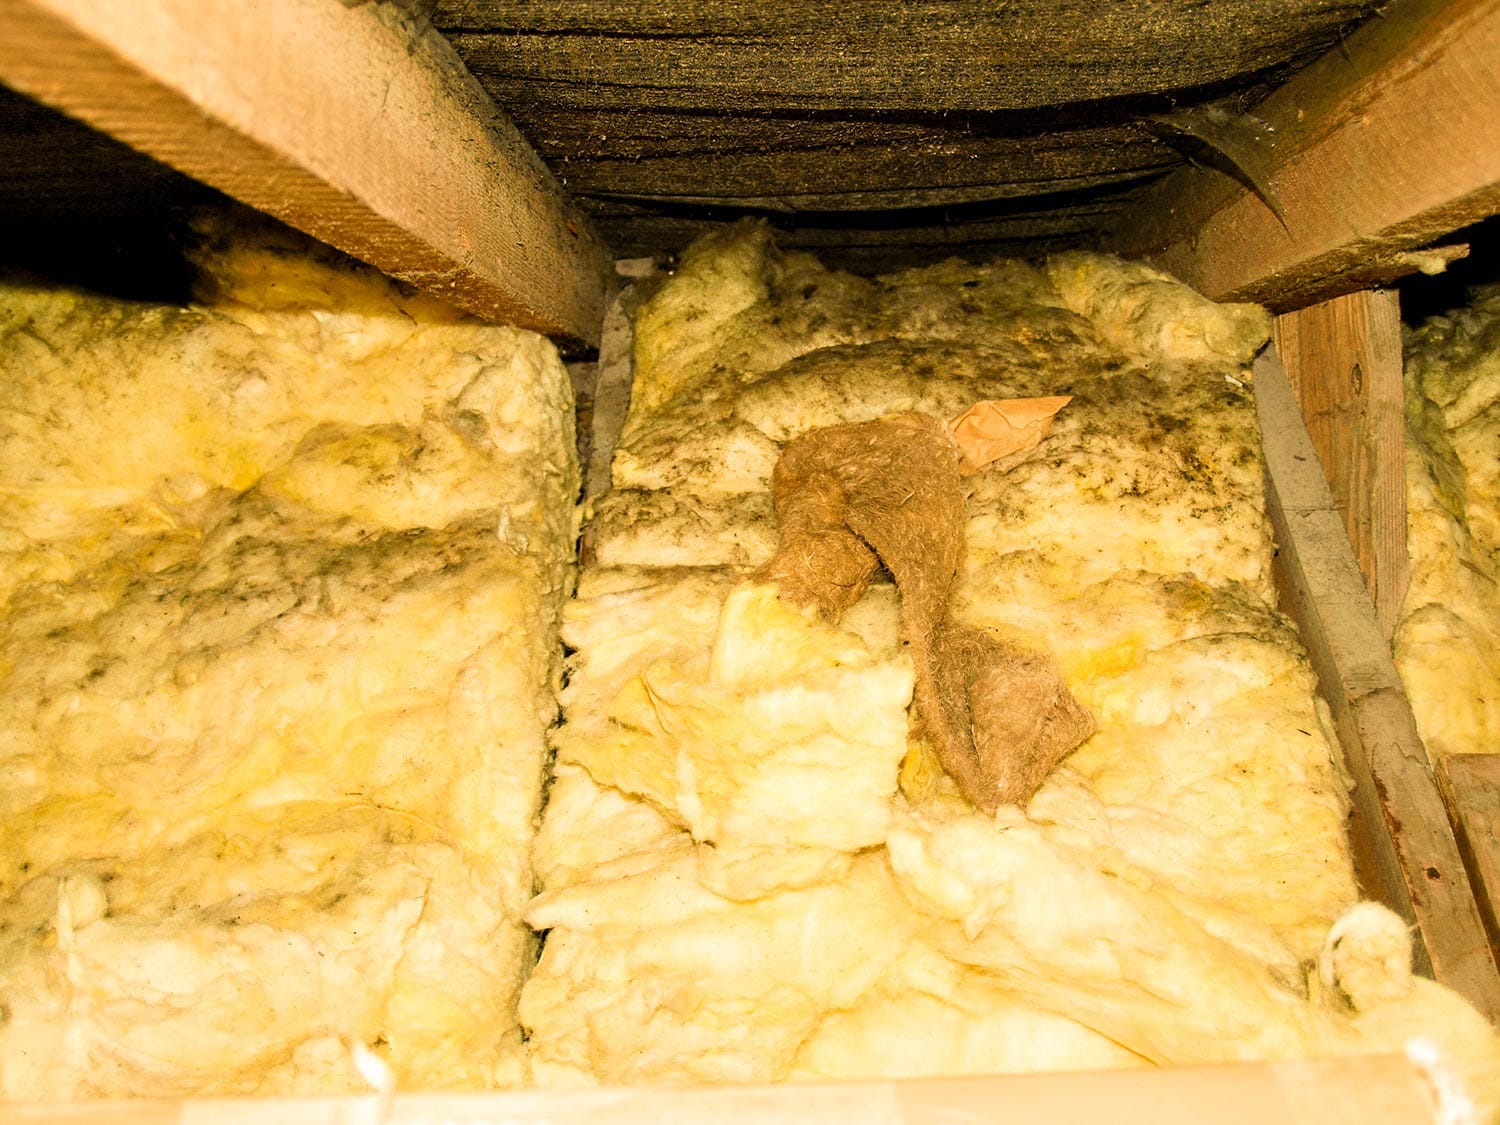 A typical household attic that is covered in mould spores